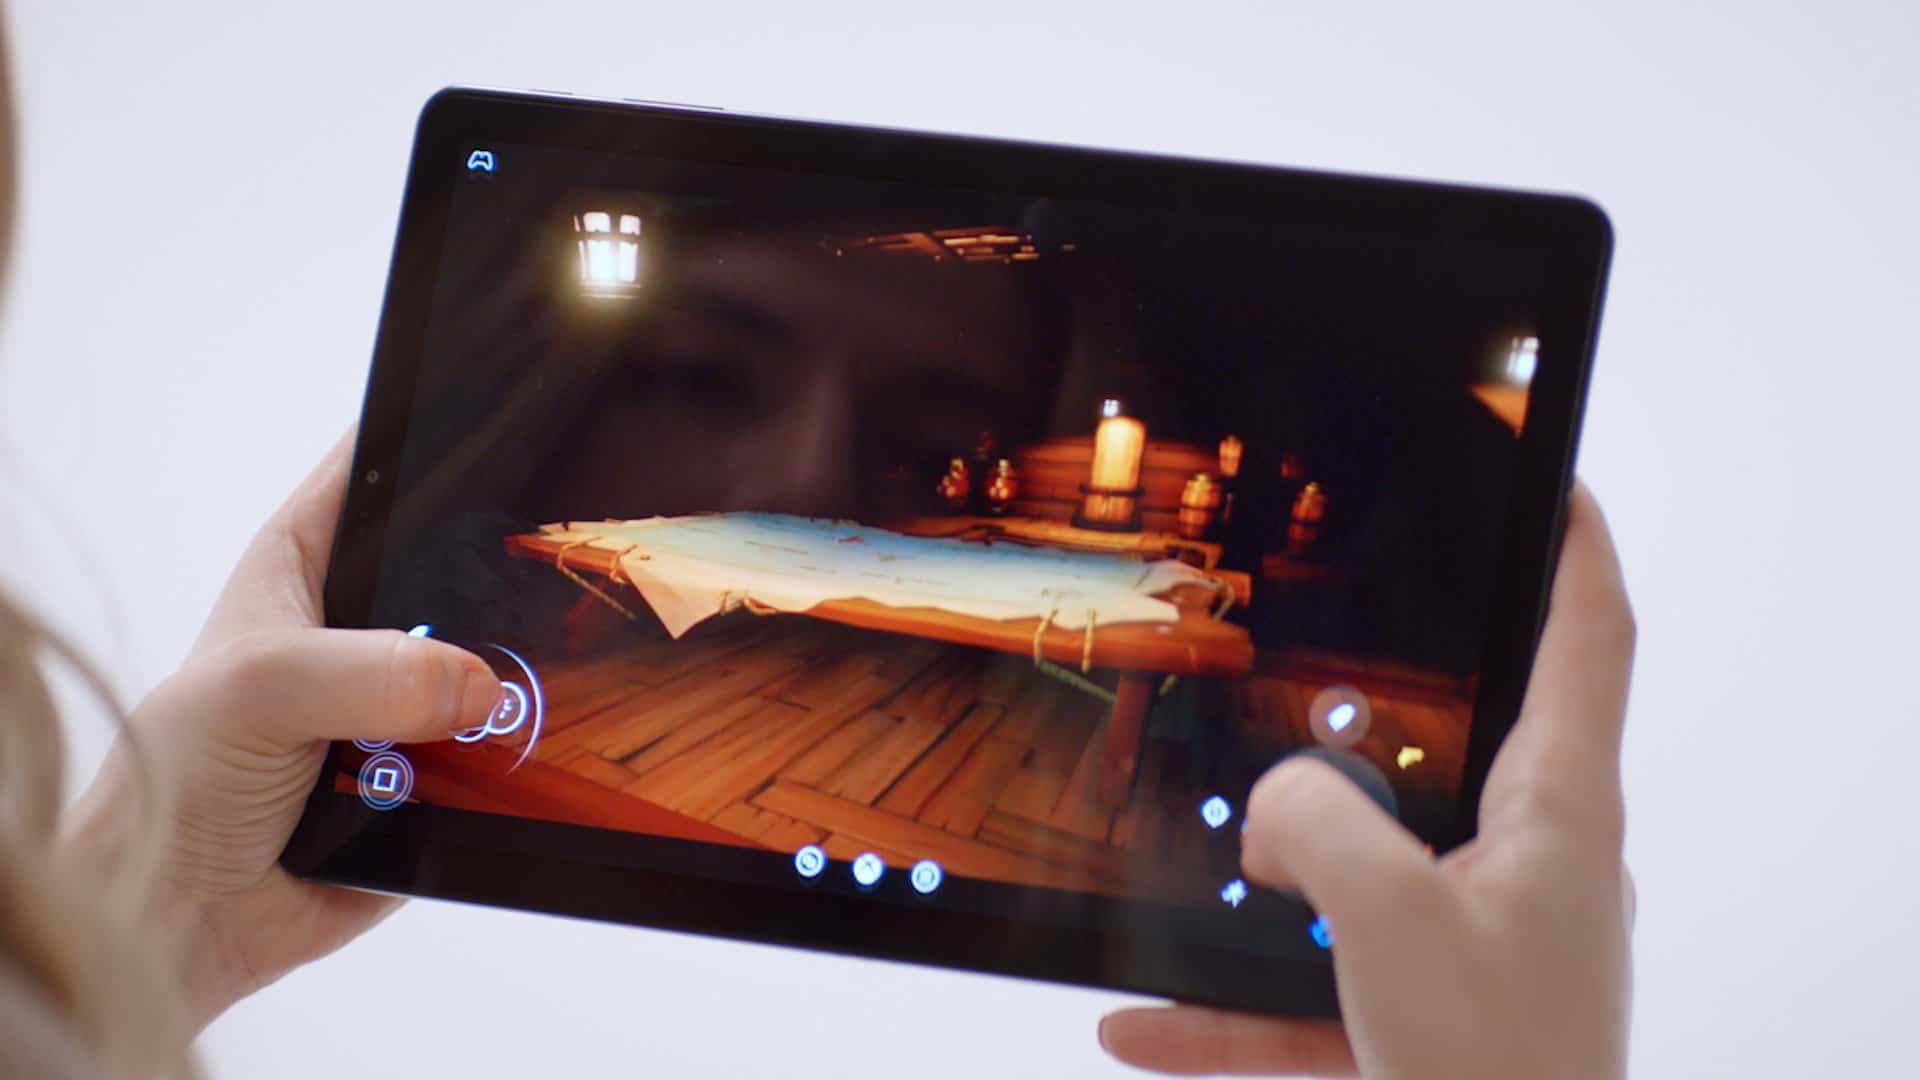 Microsoft unveils Project xCloud game streaming service